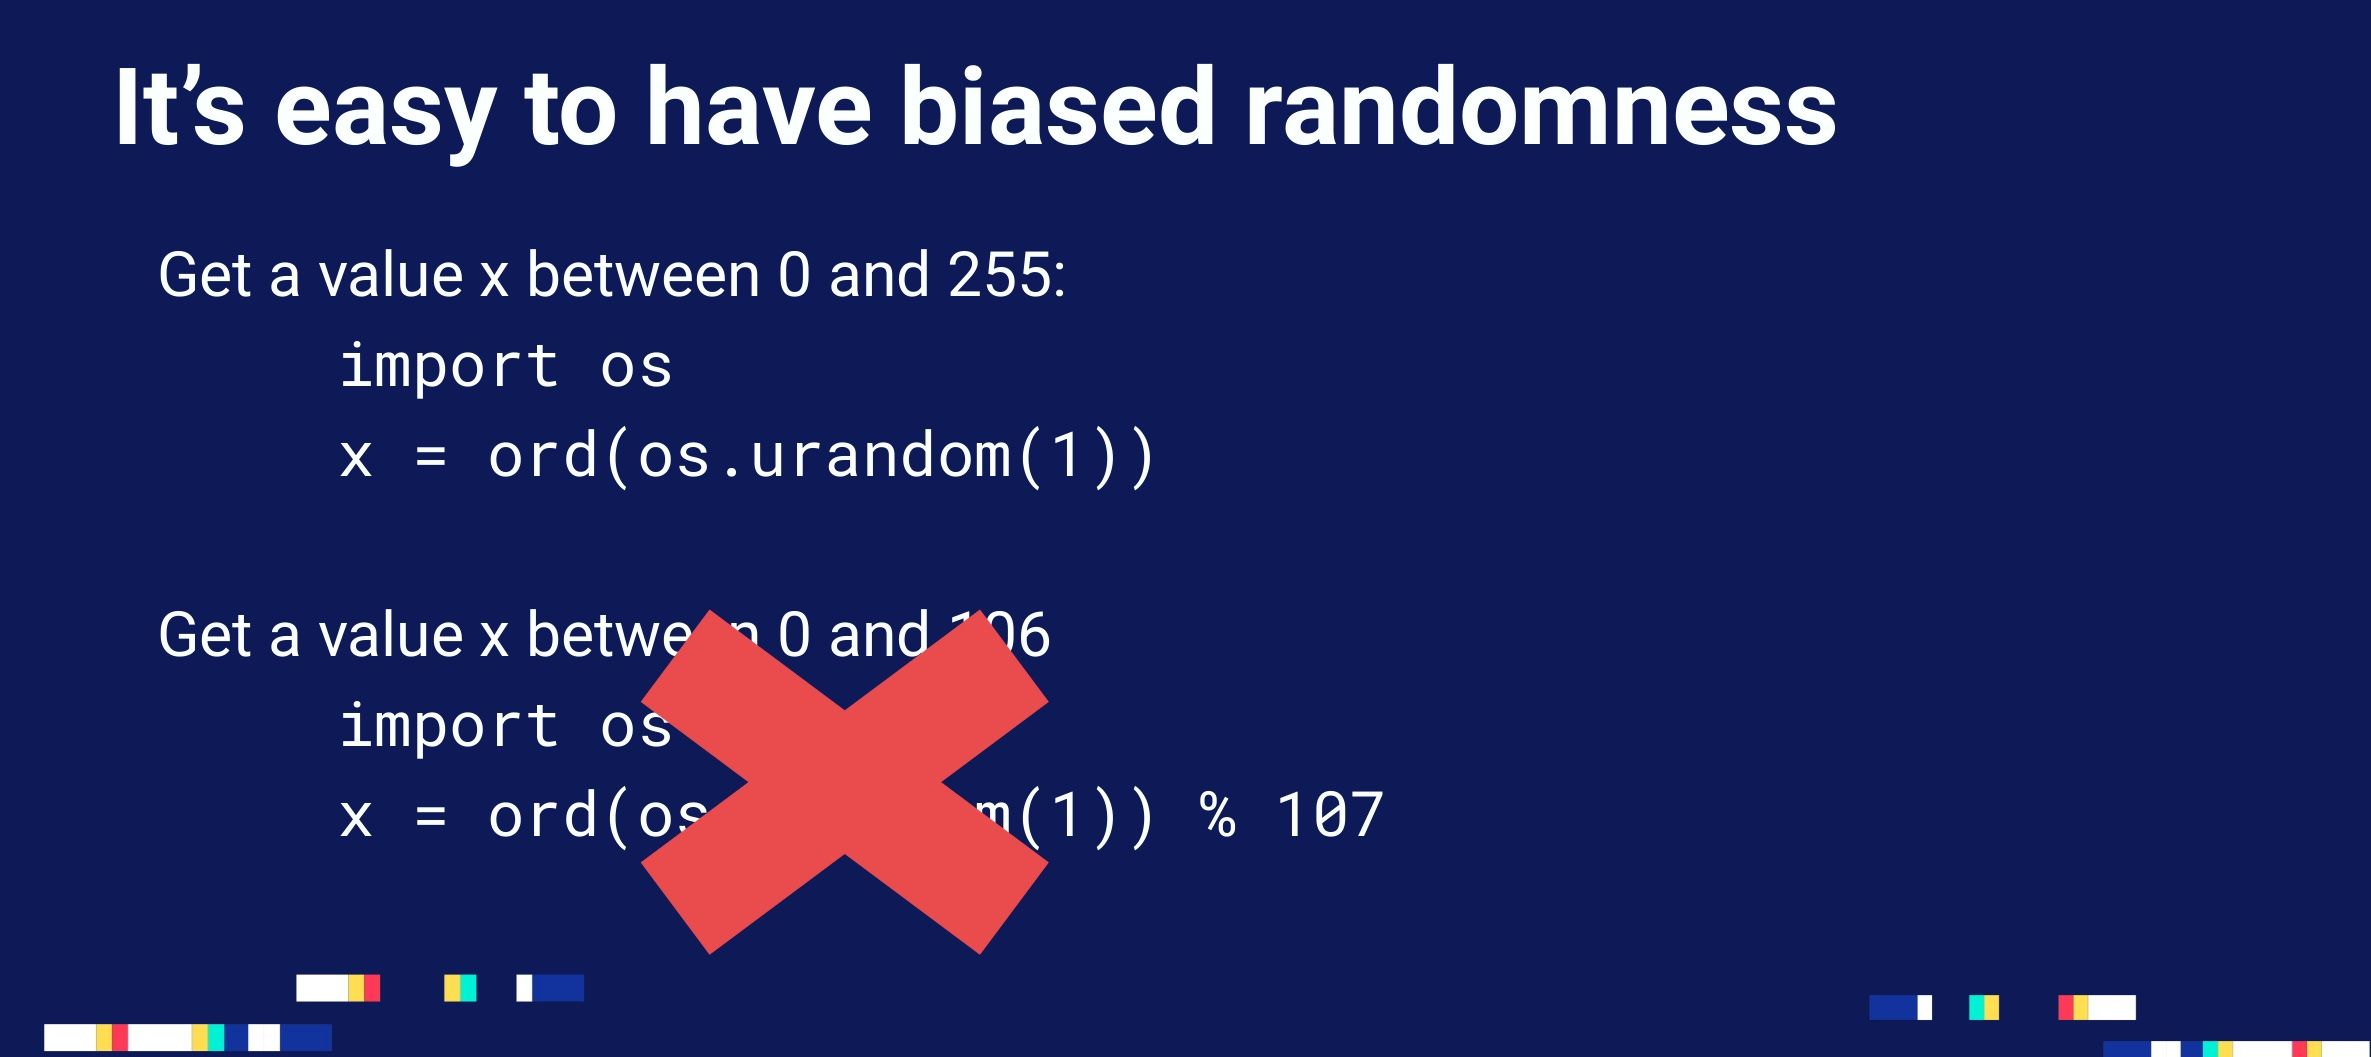 It's easy to have biased randomness.